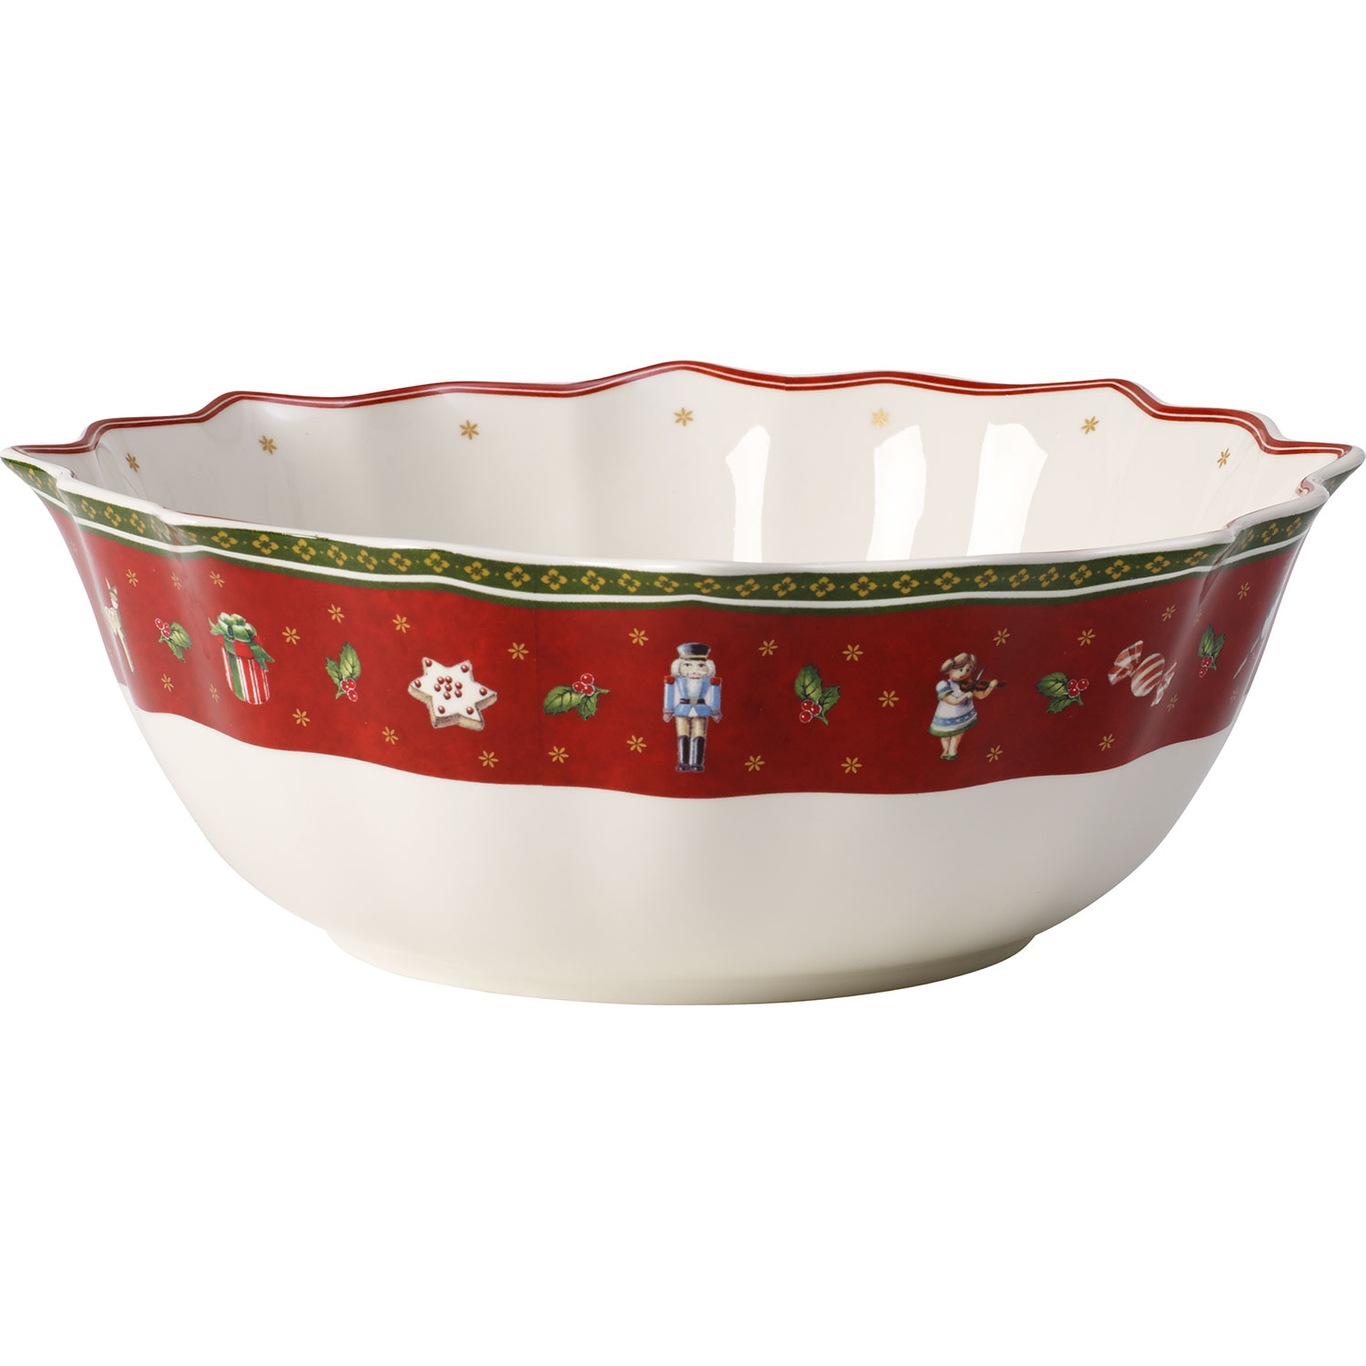 Toy's Delight Serving Bowl